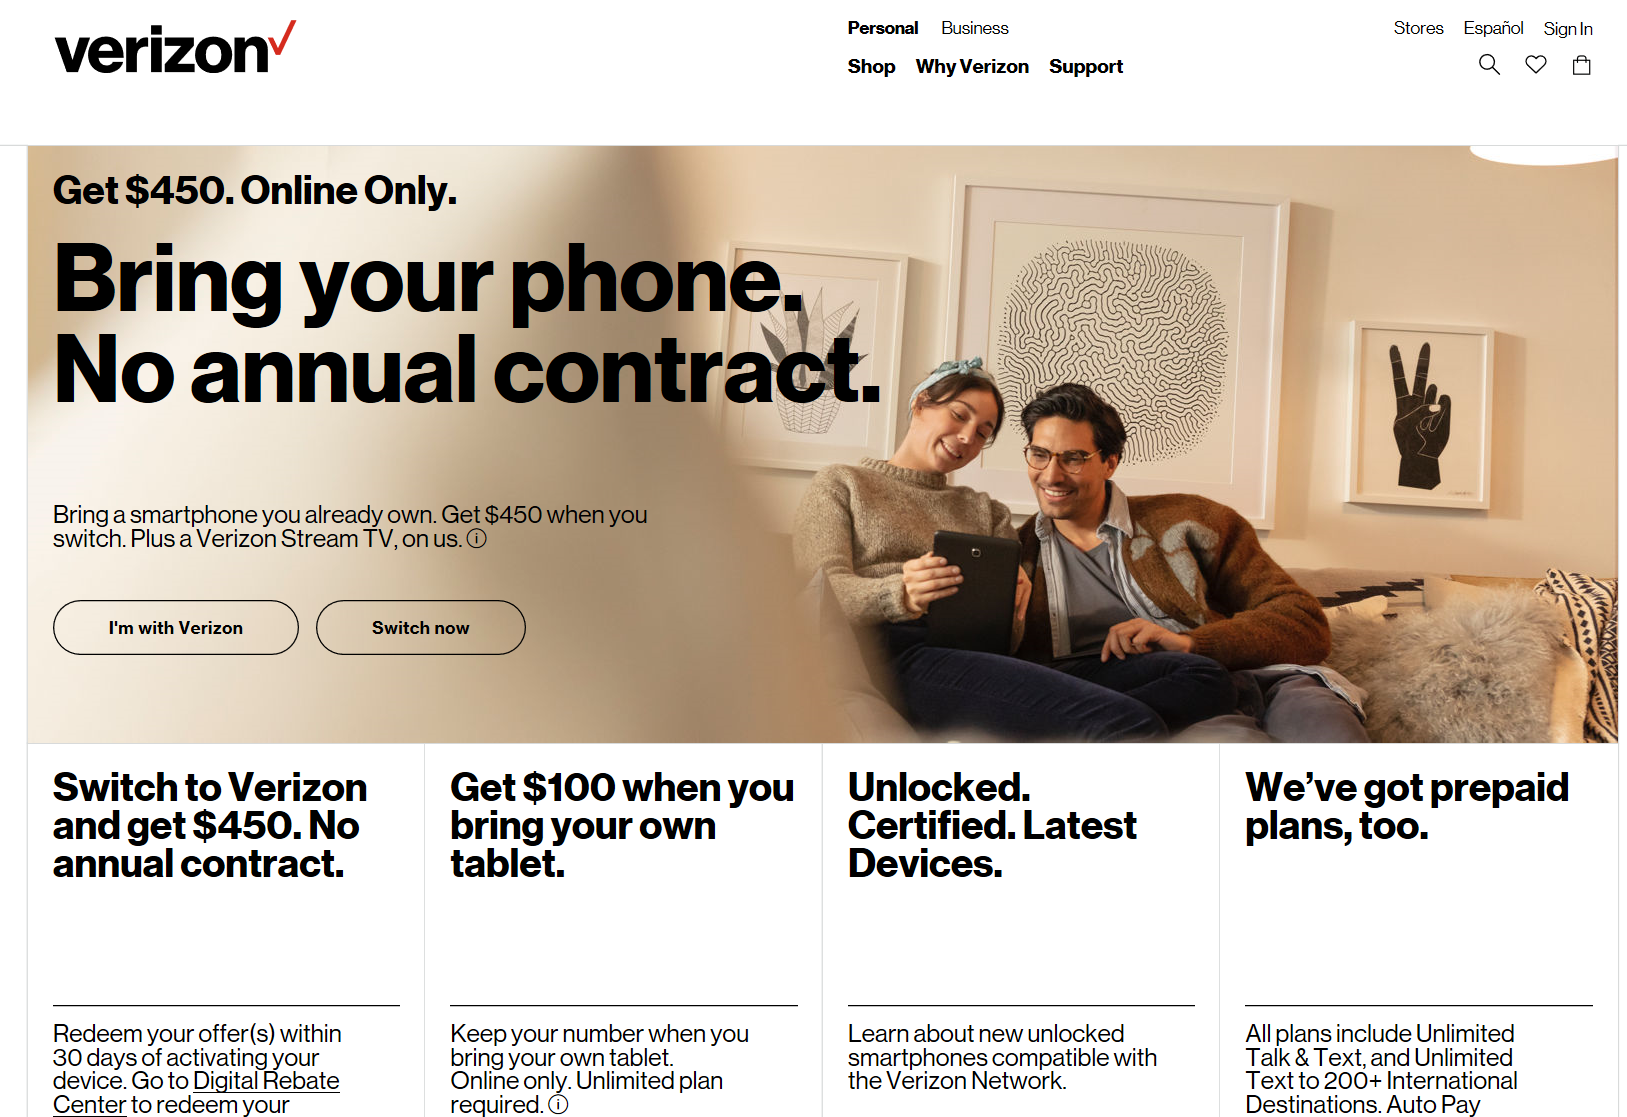 Verizon Wireless: $450 Verizon e-Gift Card for BYOD new customers, online only, option to bypass credit check